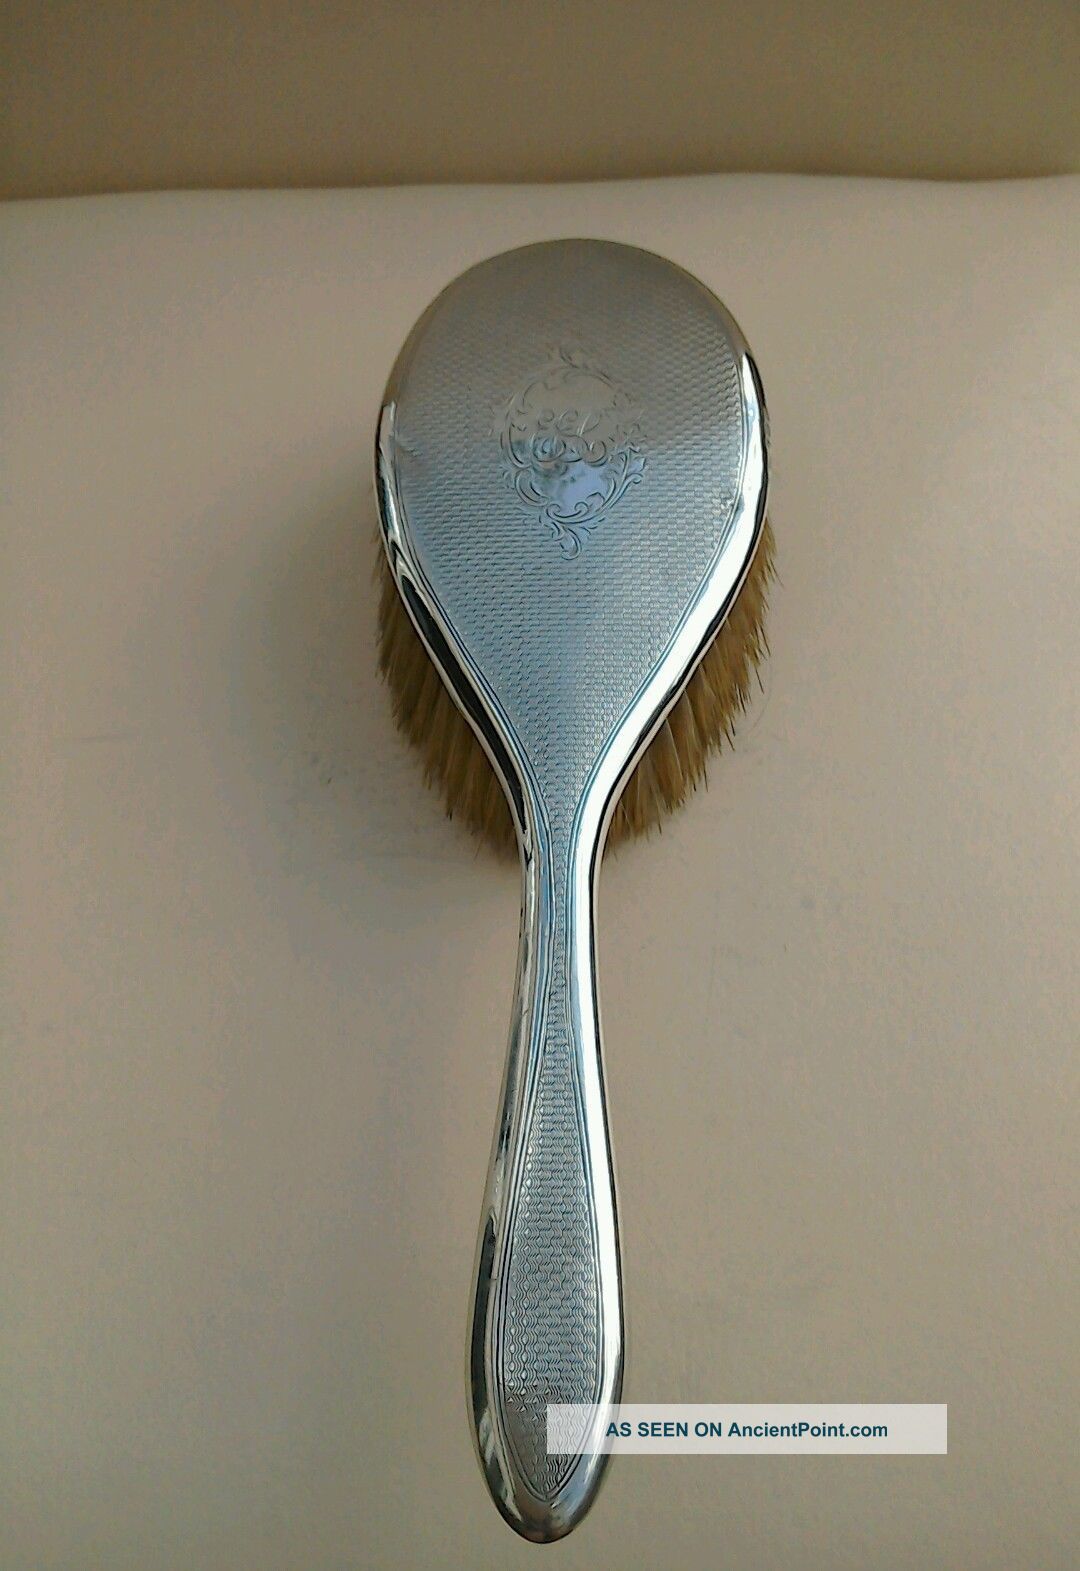 Antique Silver Hairbrush With Initials E E C Engraved 1911c Brushes & Grooming Sets photo